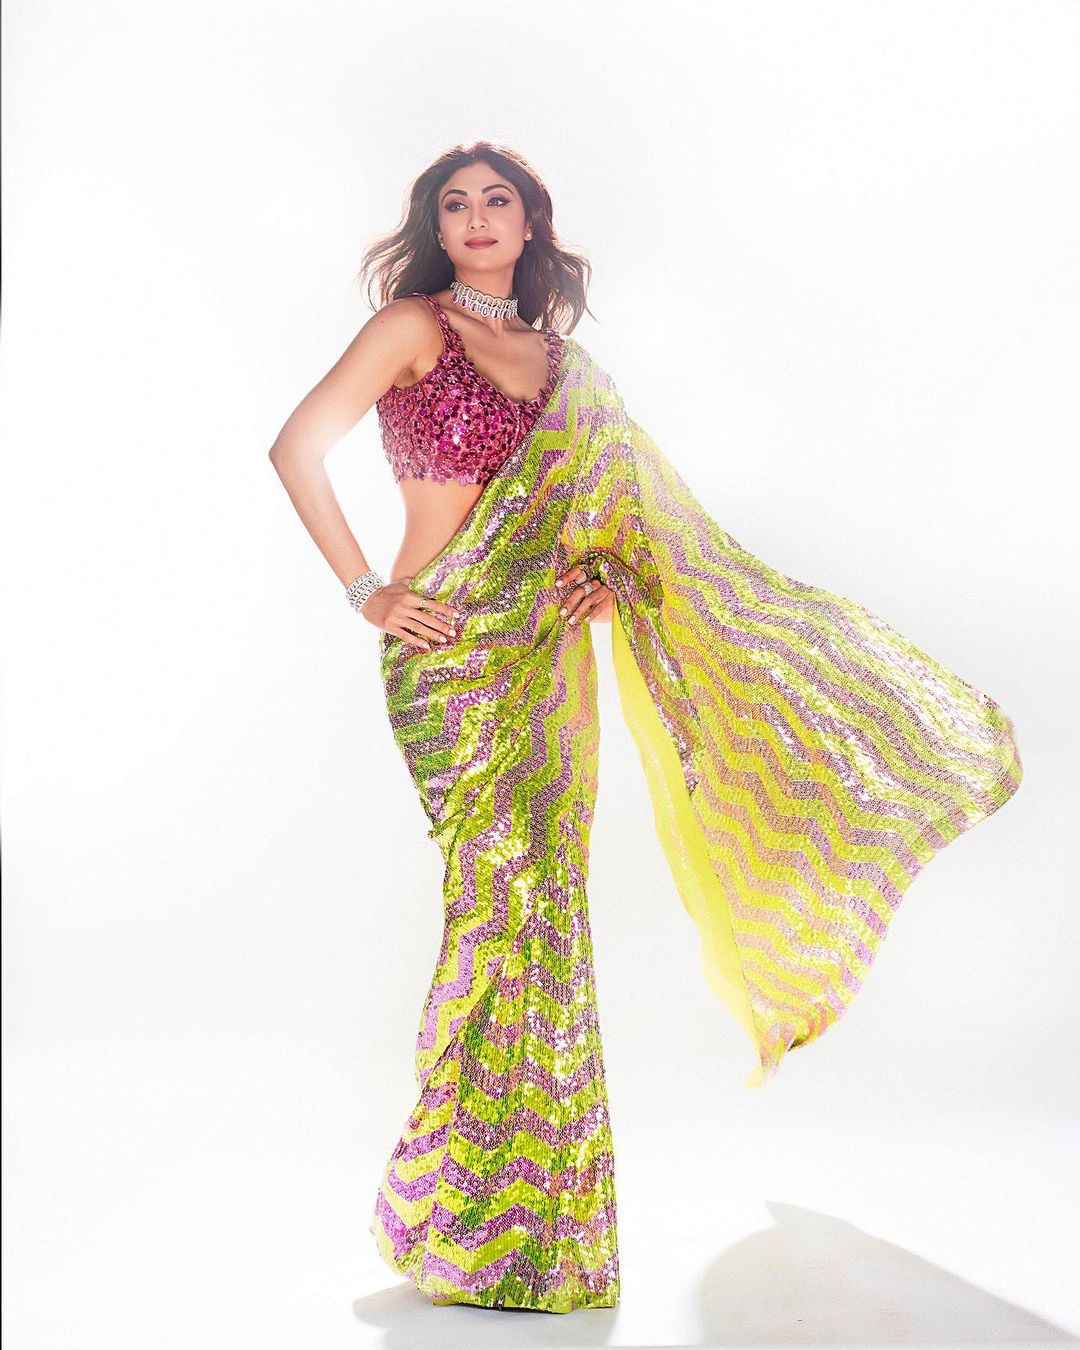  Shilpa Shetty Kundra looks sizzling in the shimmering striped saree. (Image: Instagram)